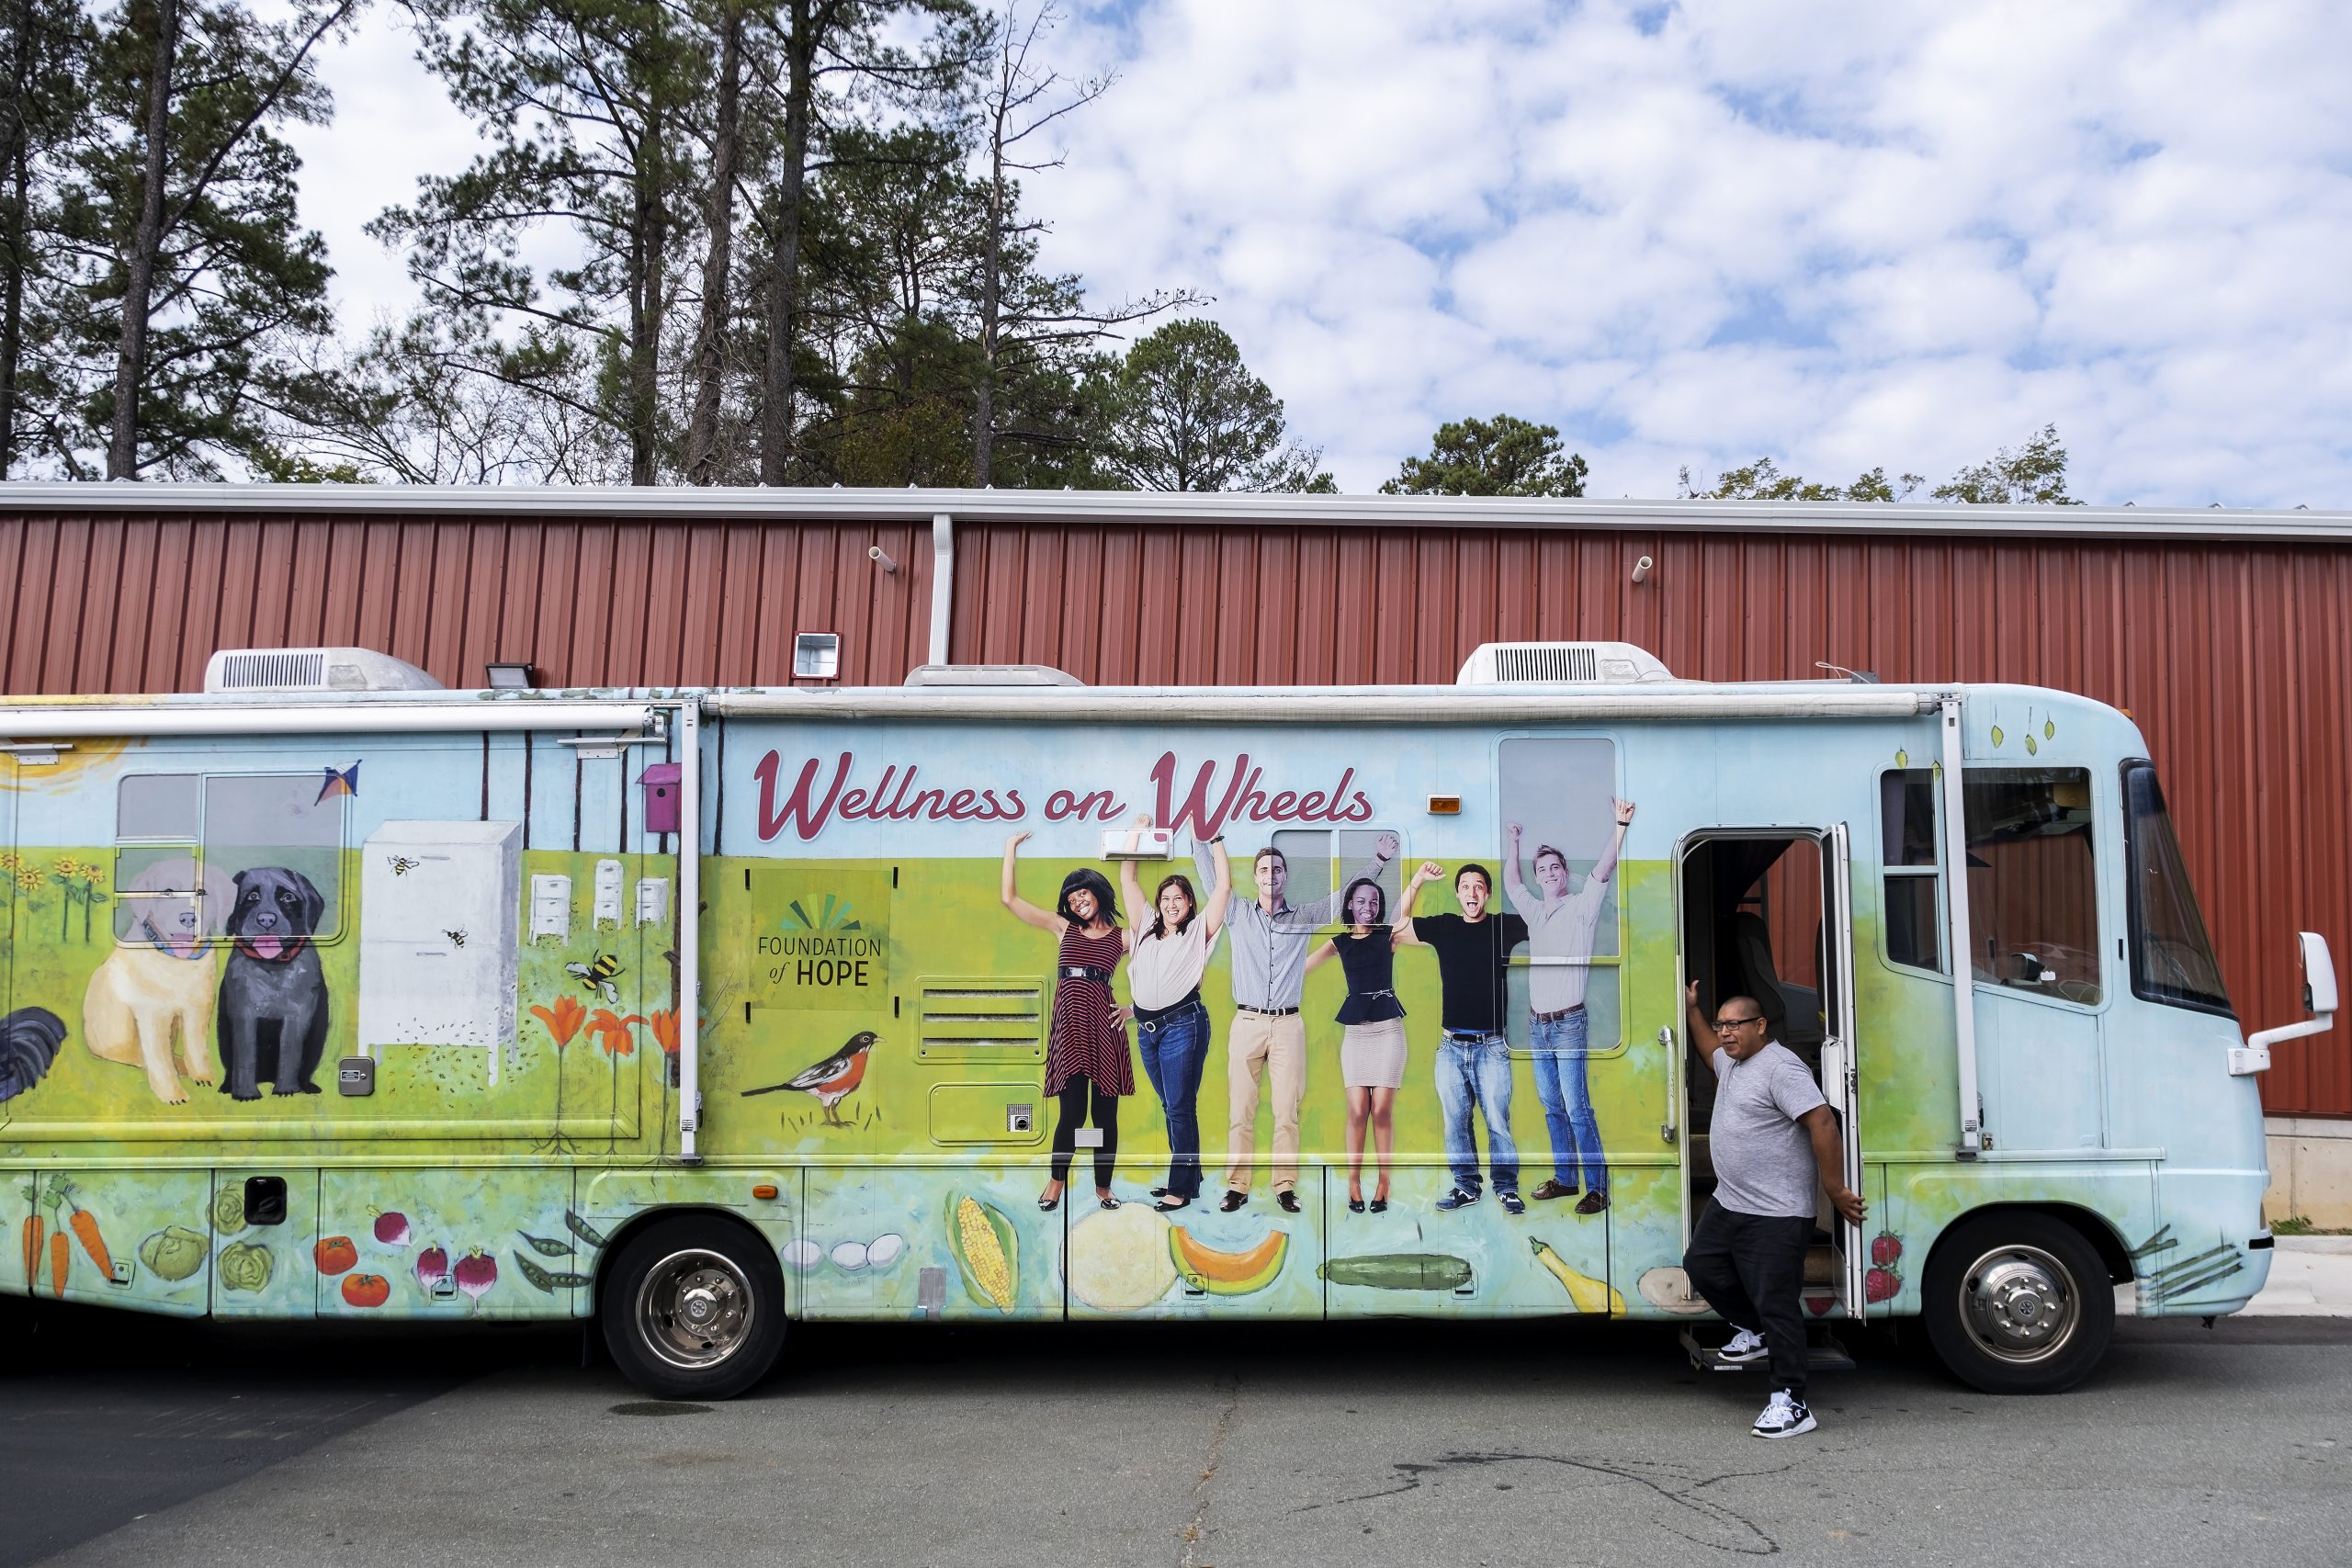 Delfino Benitez steps out of of the Wellness On Wheels RV “Miss Penny.” Benitez, a sophomore majoring in African, African American and diaspora studies, is Miss Penny’s driver and serves as a Spanish language translator at mobile clinics. (Jon Gardiner/UNC-Chapel Hill)